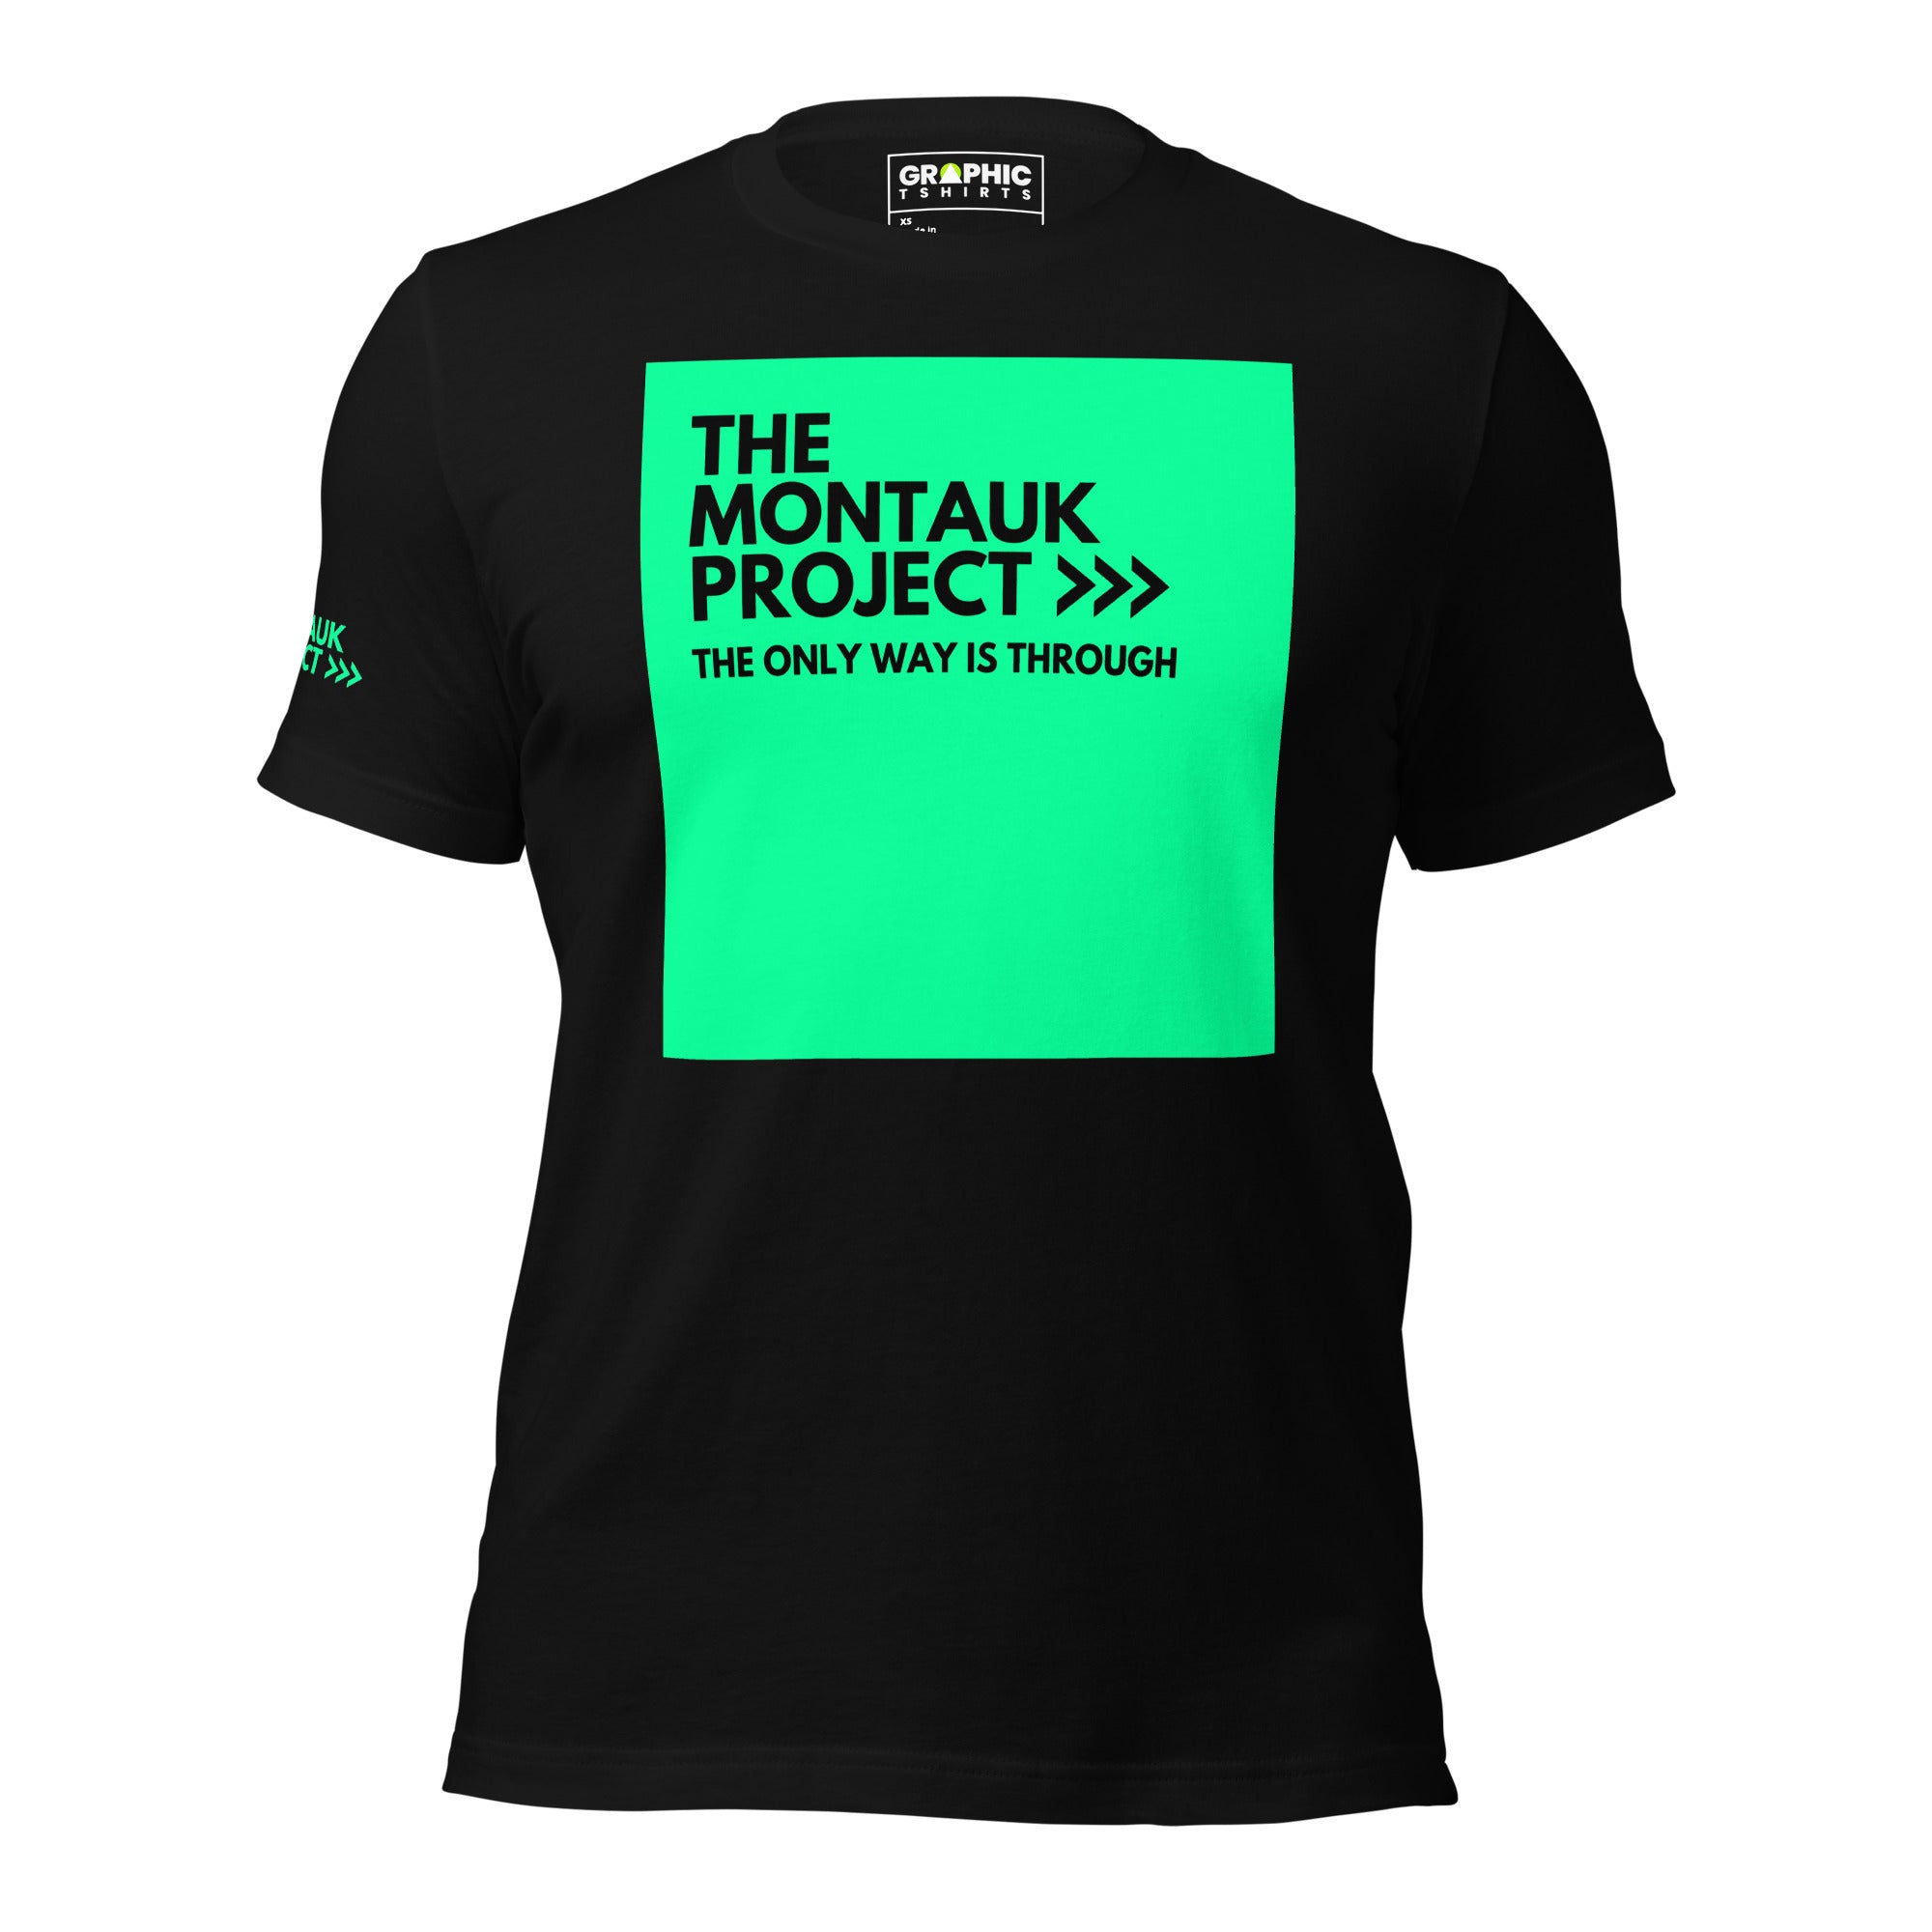 Unisex Premium T-Shirt - The Montauk Project The Only Way Is Through